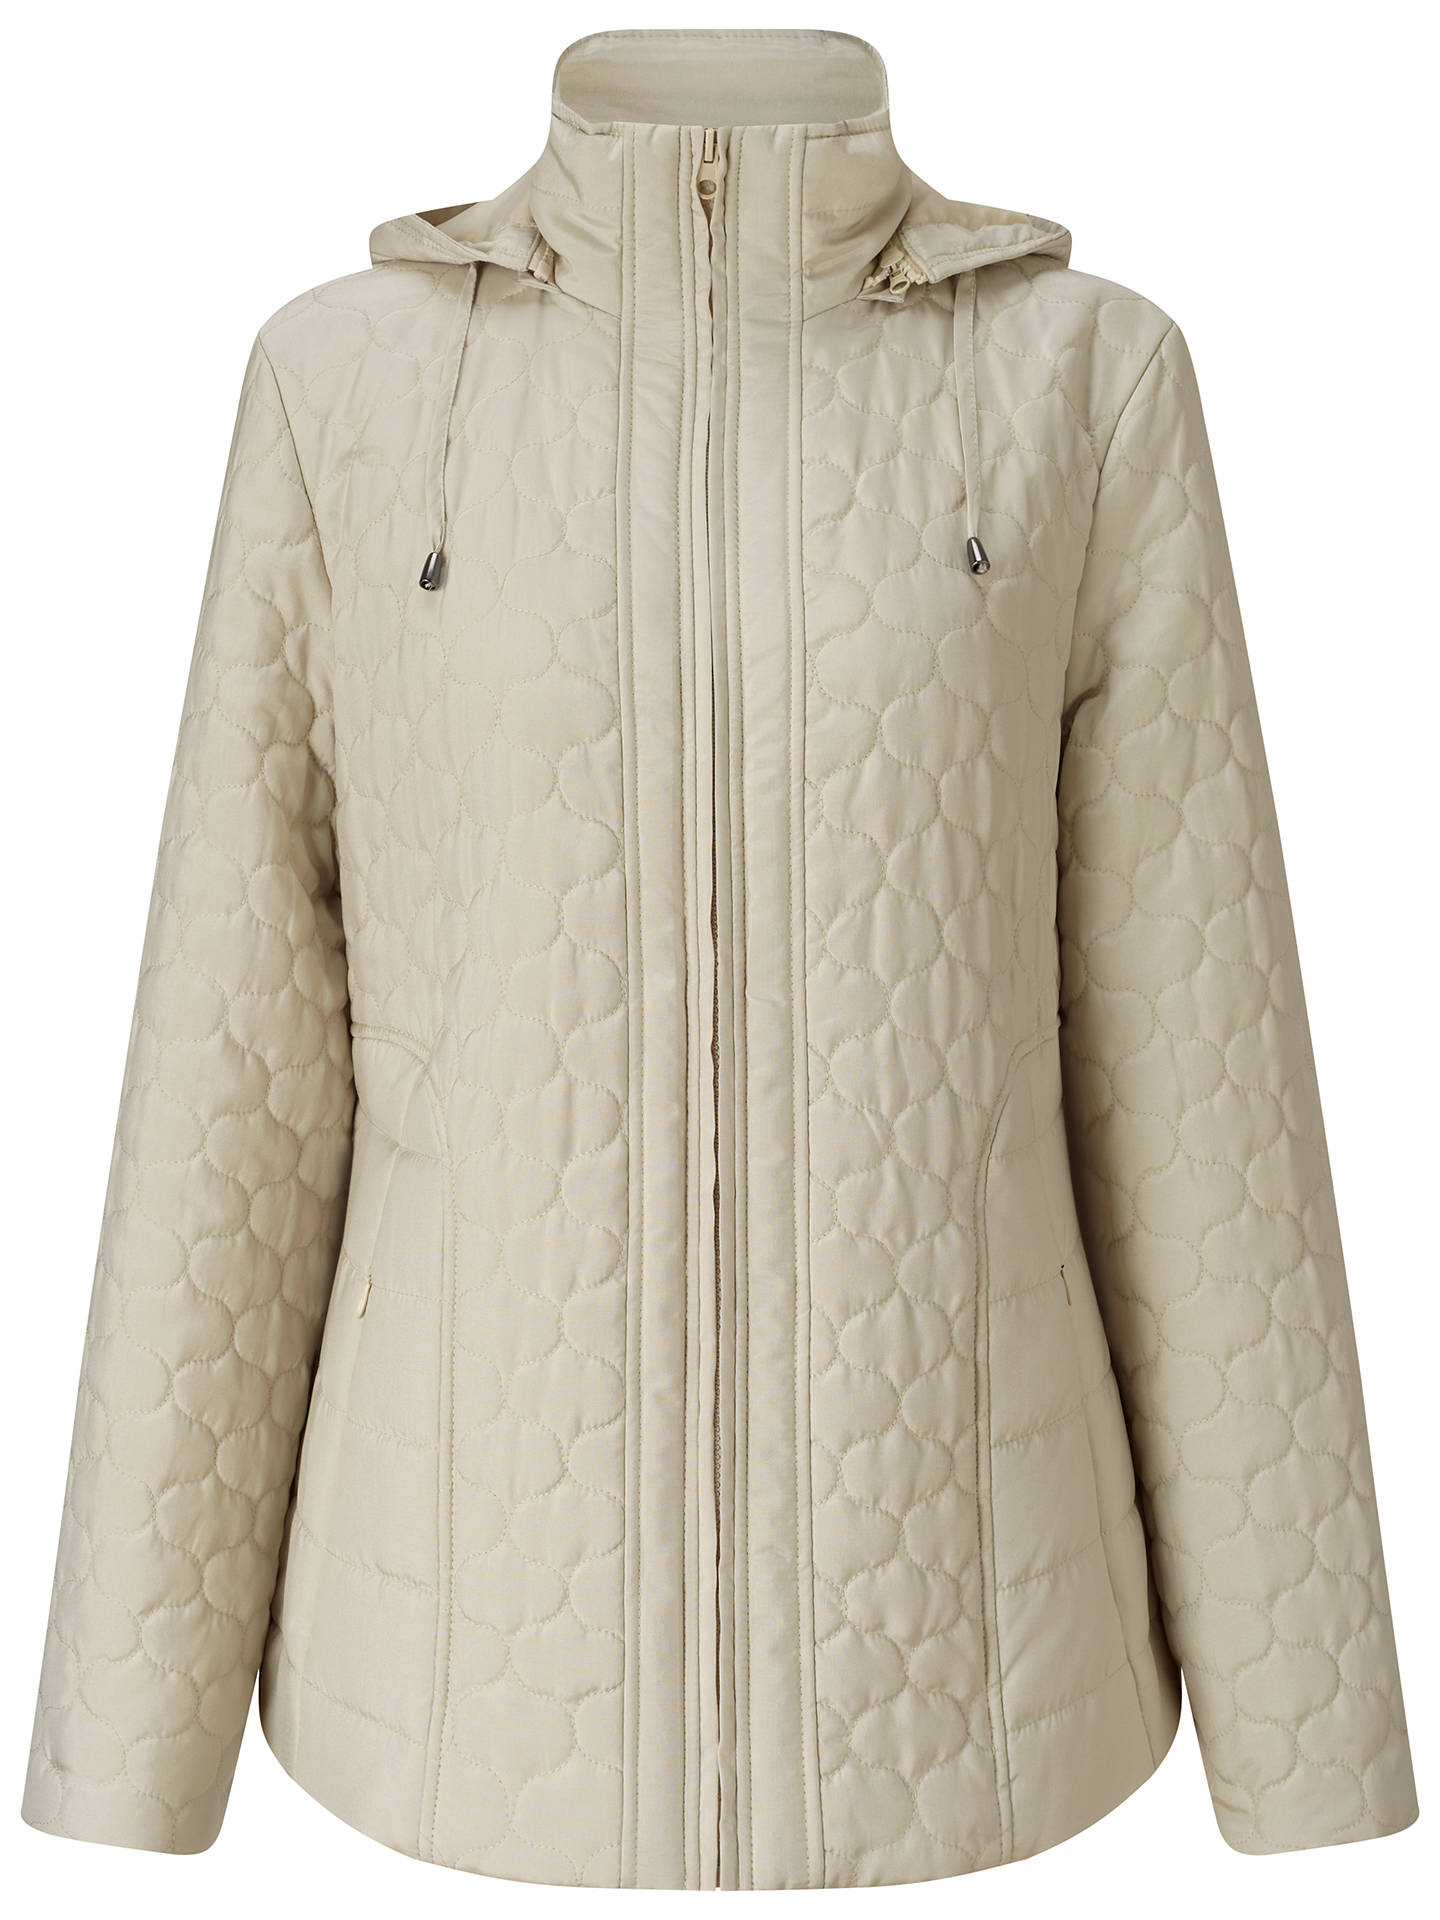 Four Seasons Quilted Jacket at John Lewis & Partners